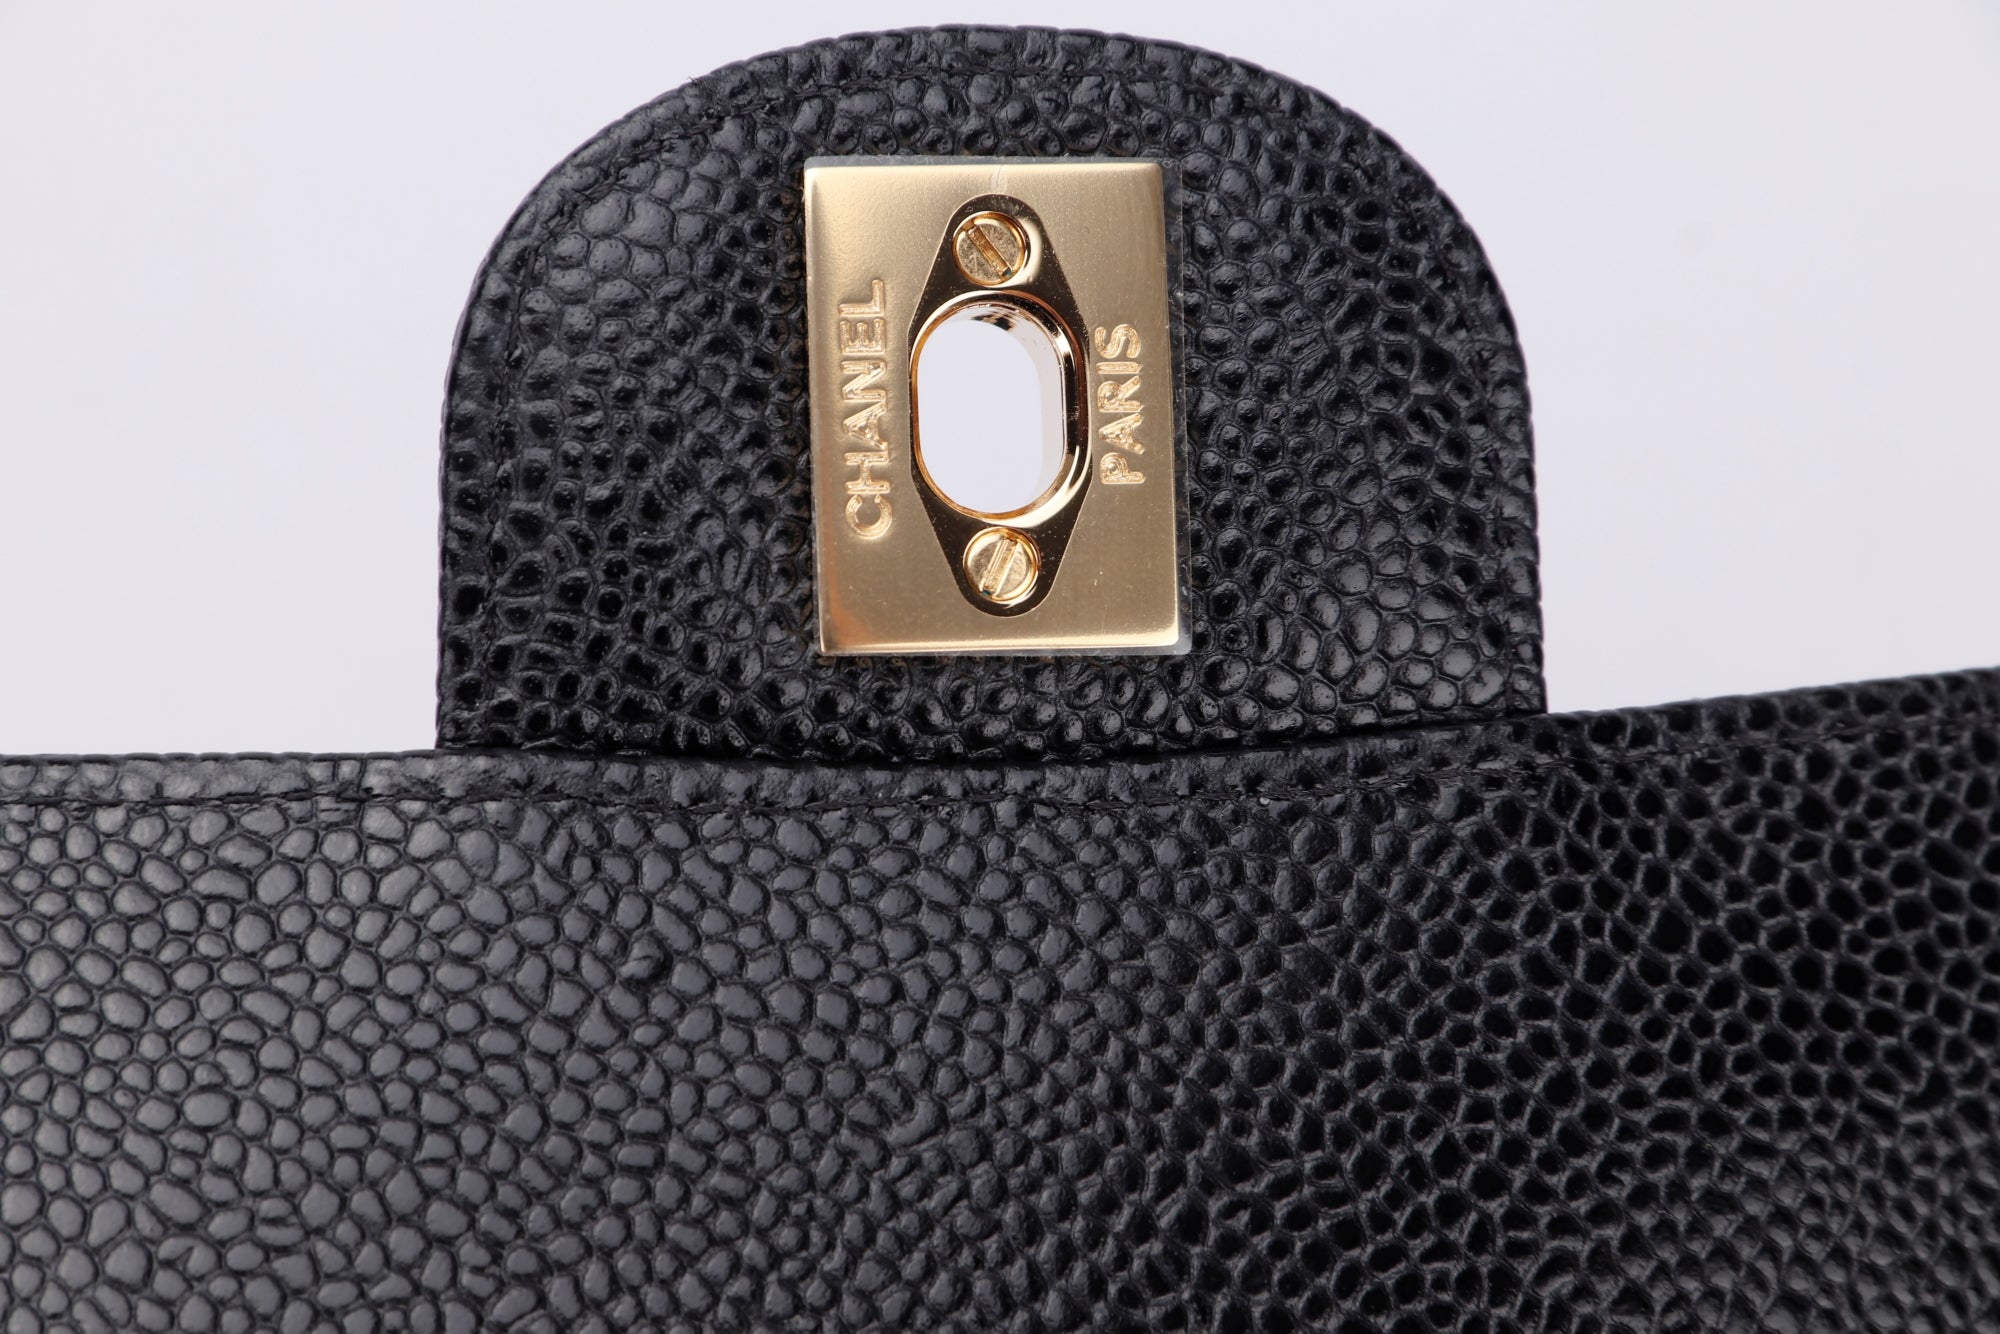 Chanel Classic Flap (KT42xxxx) Medium Size Black Caviar Leather Gold Hardware, with Dust Cover & Box